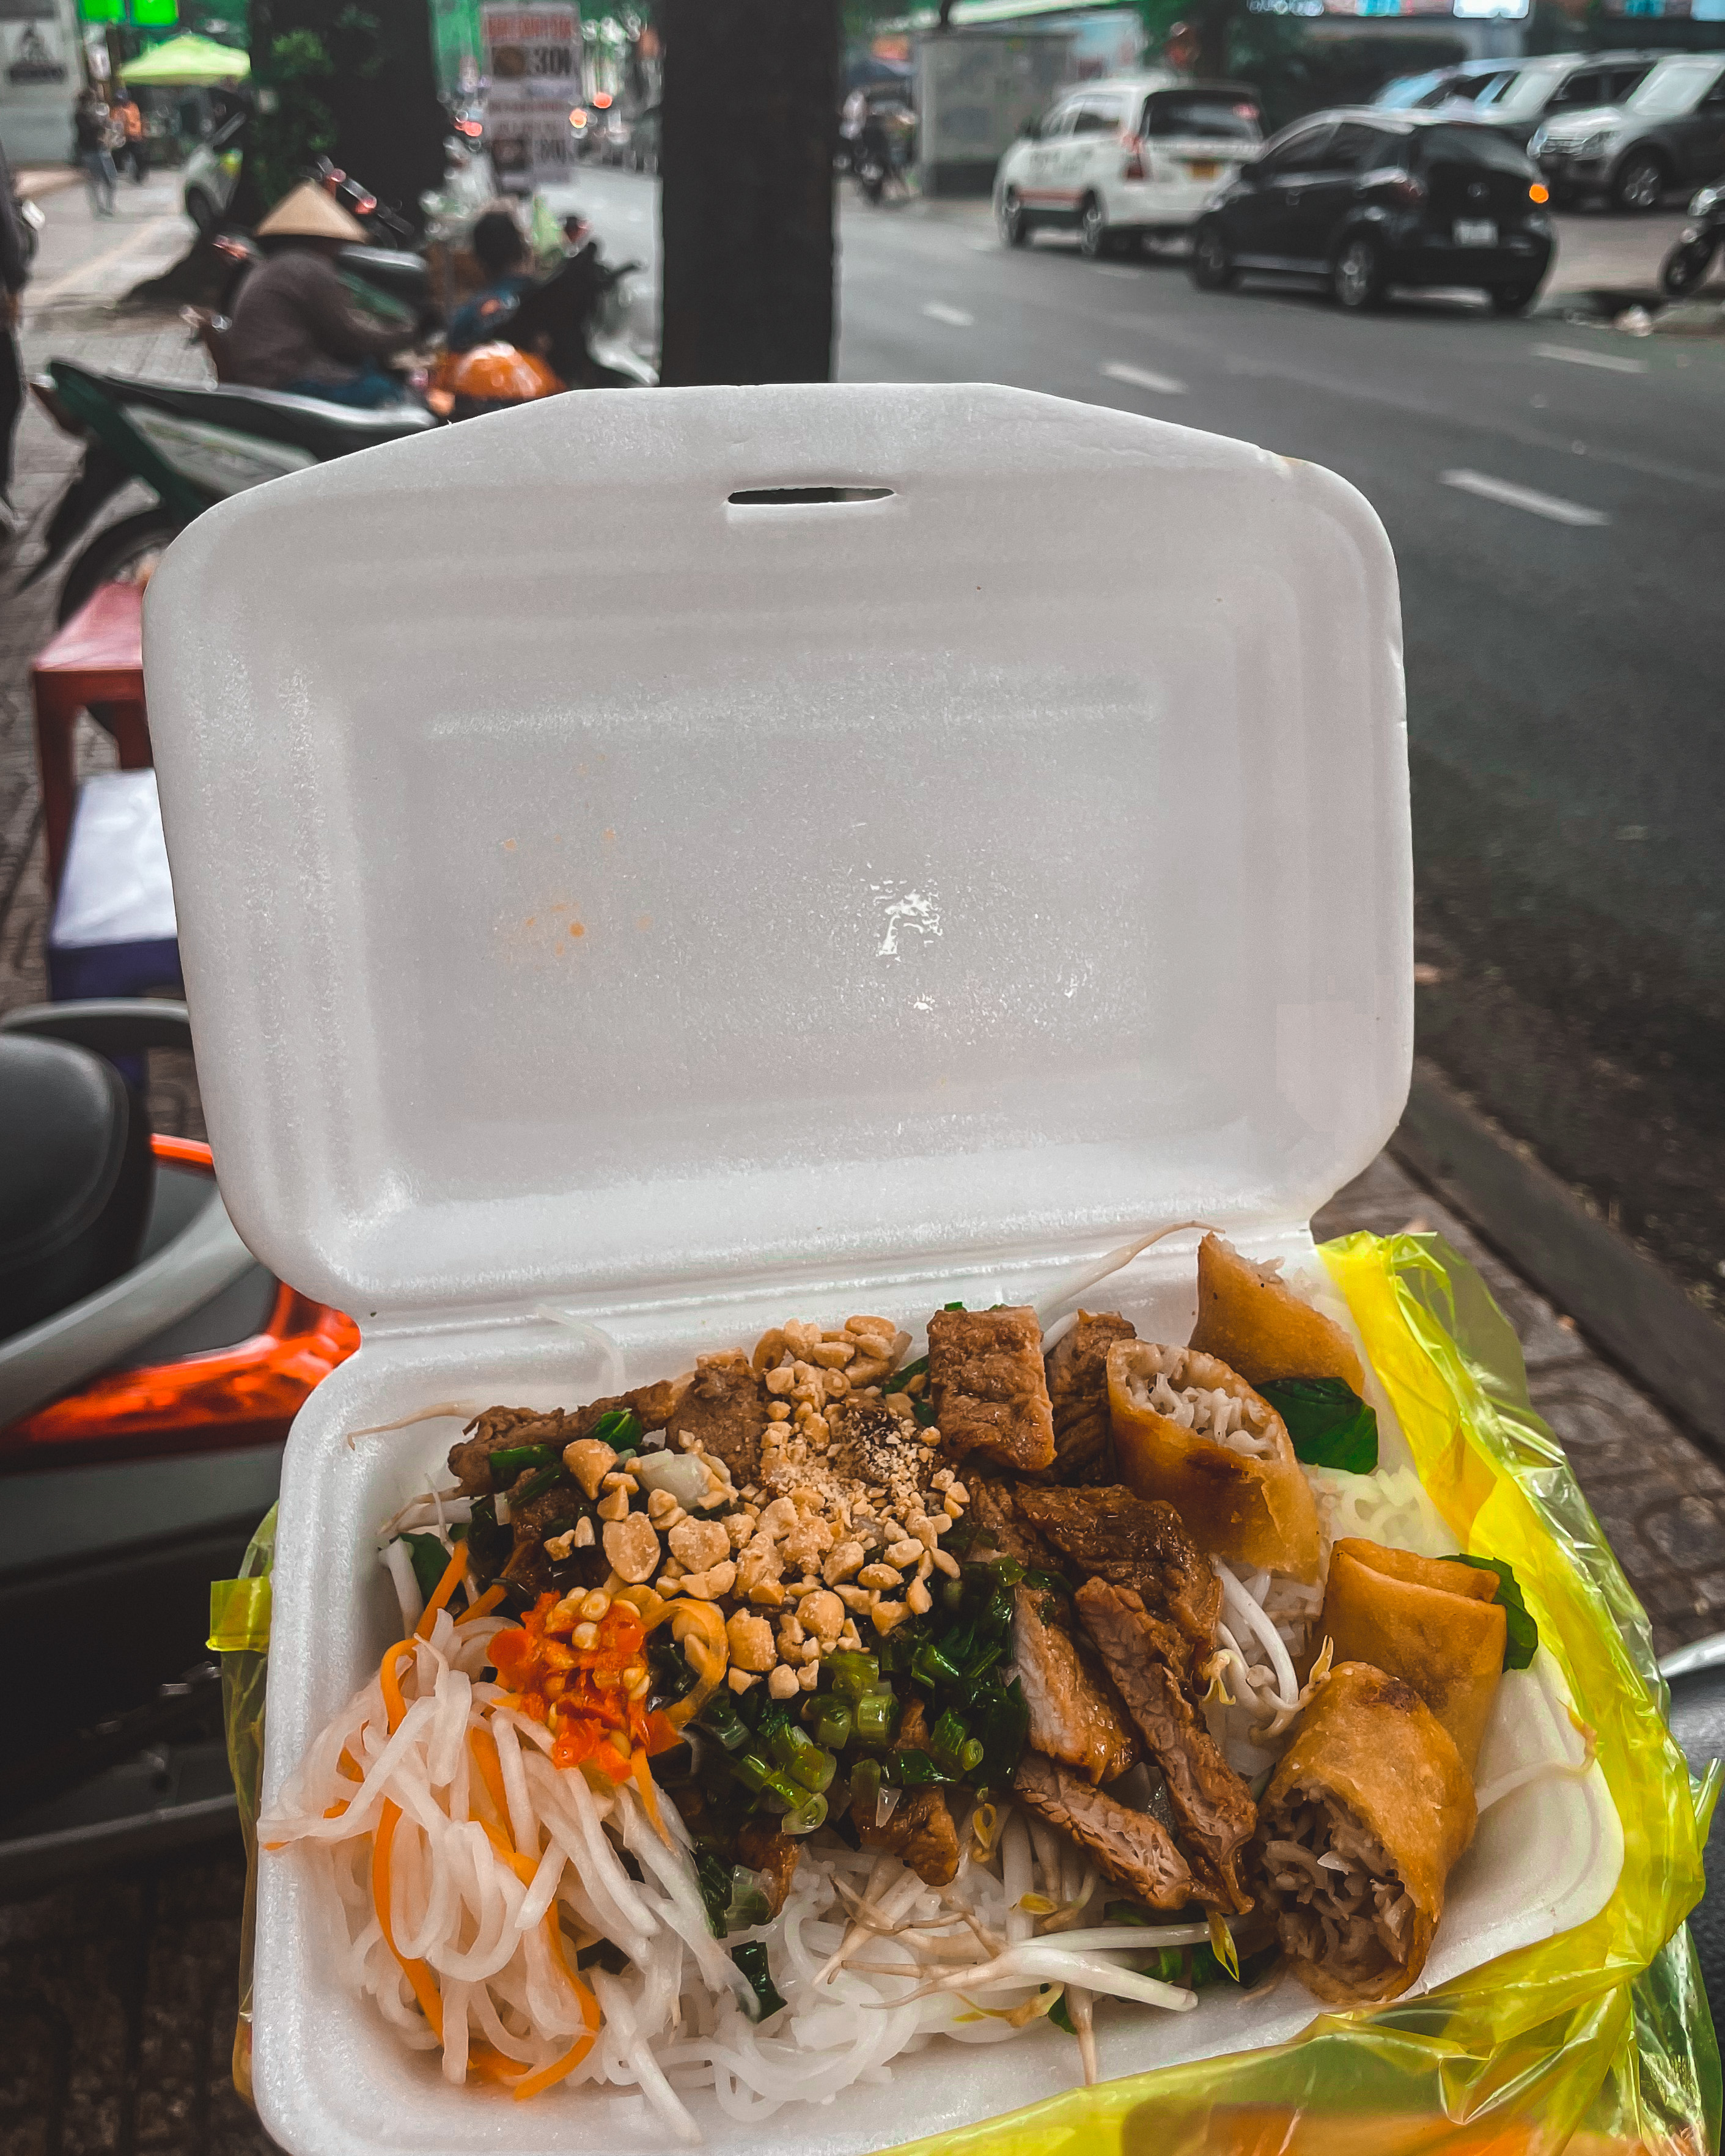 A to-go box of 'bún thịt nướng' sold at a stall on Vo Van Tan Street in District 3, Ho Chi Minh City. Photo: Cassanda Cassidy / Tuoi Tre News